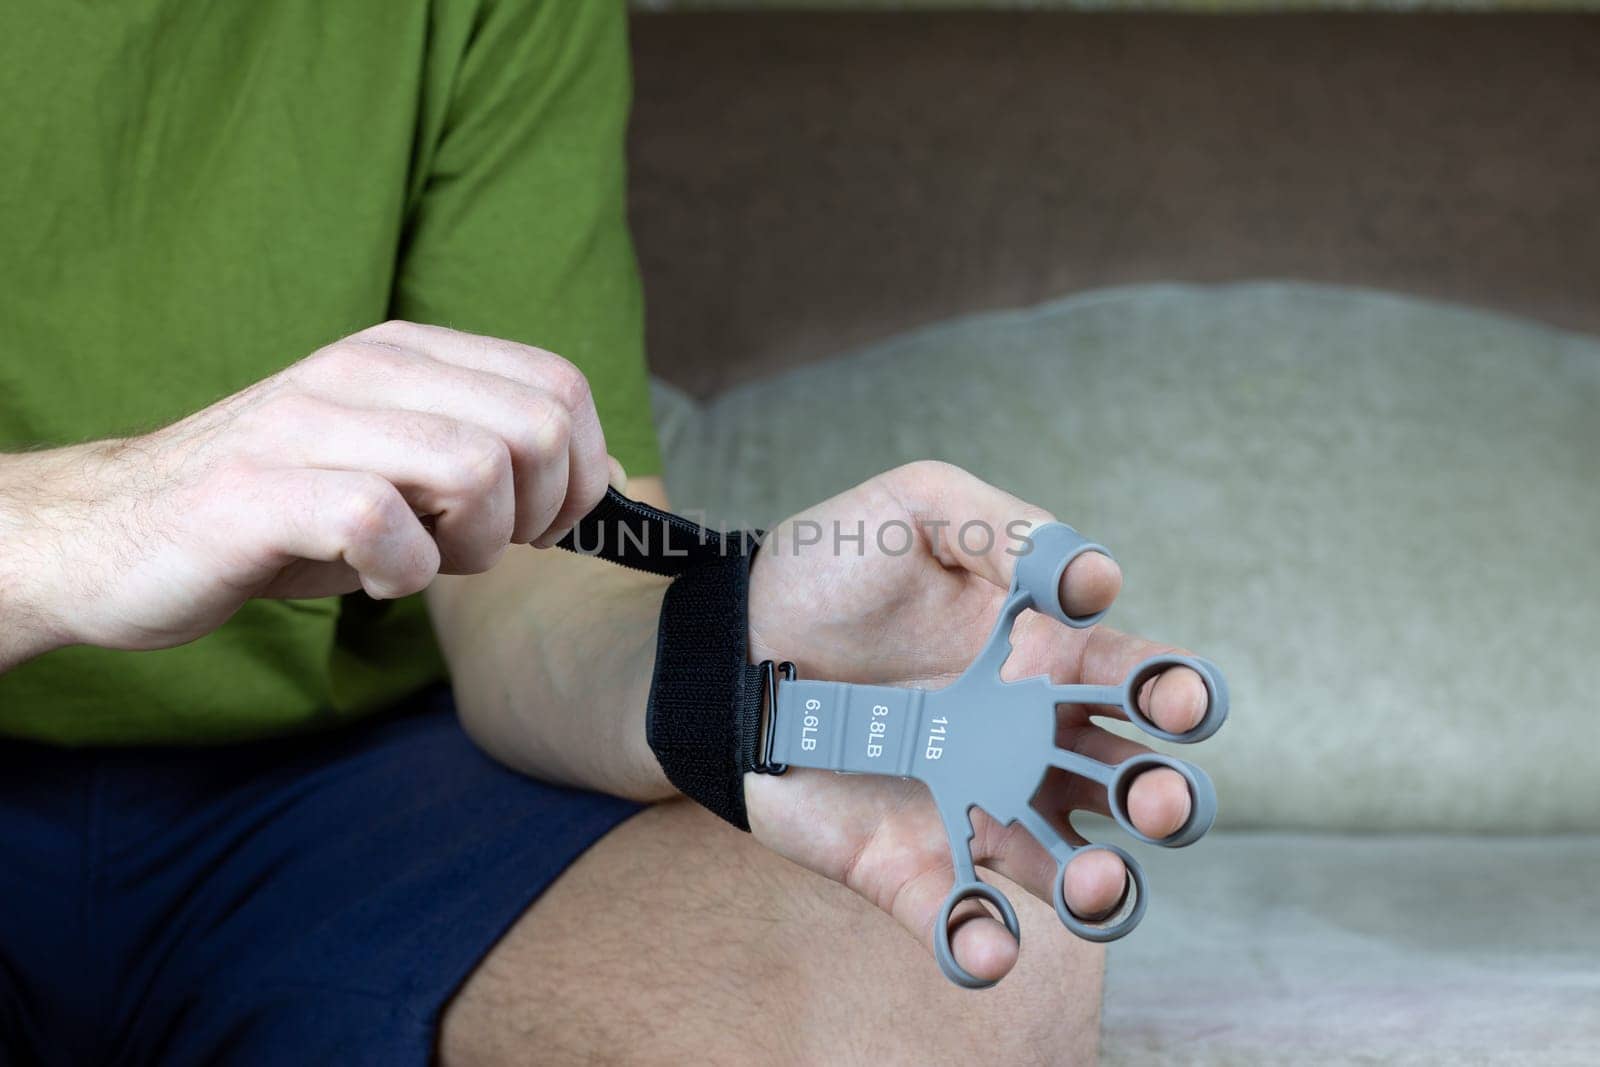 Hands are put on silicone finger trainer with special velcro by timurmalazoniia